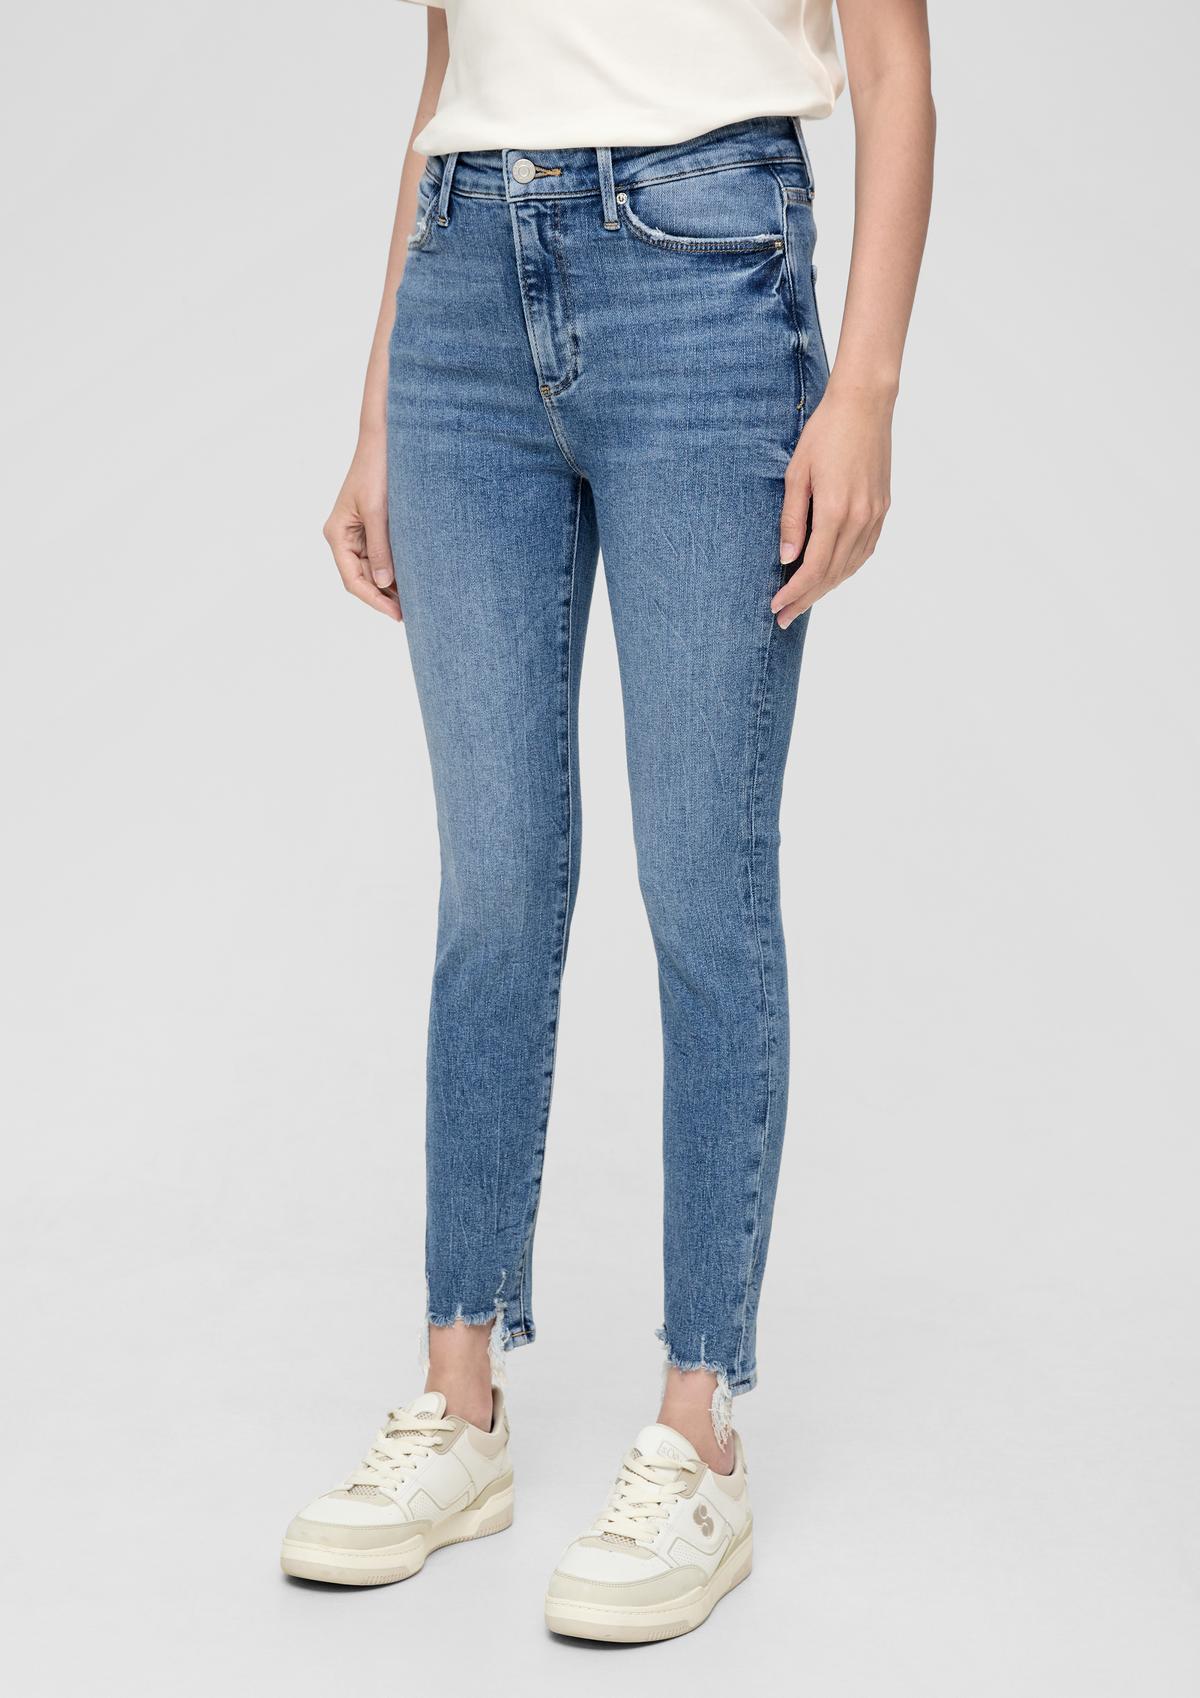 s.Oliver Ankle-Jeans Izabell / Skinny Fit / Mid Rise / Skinny Leg / Baumwollstretch